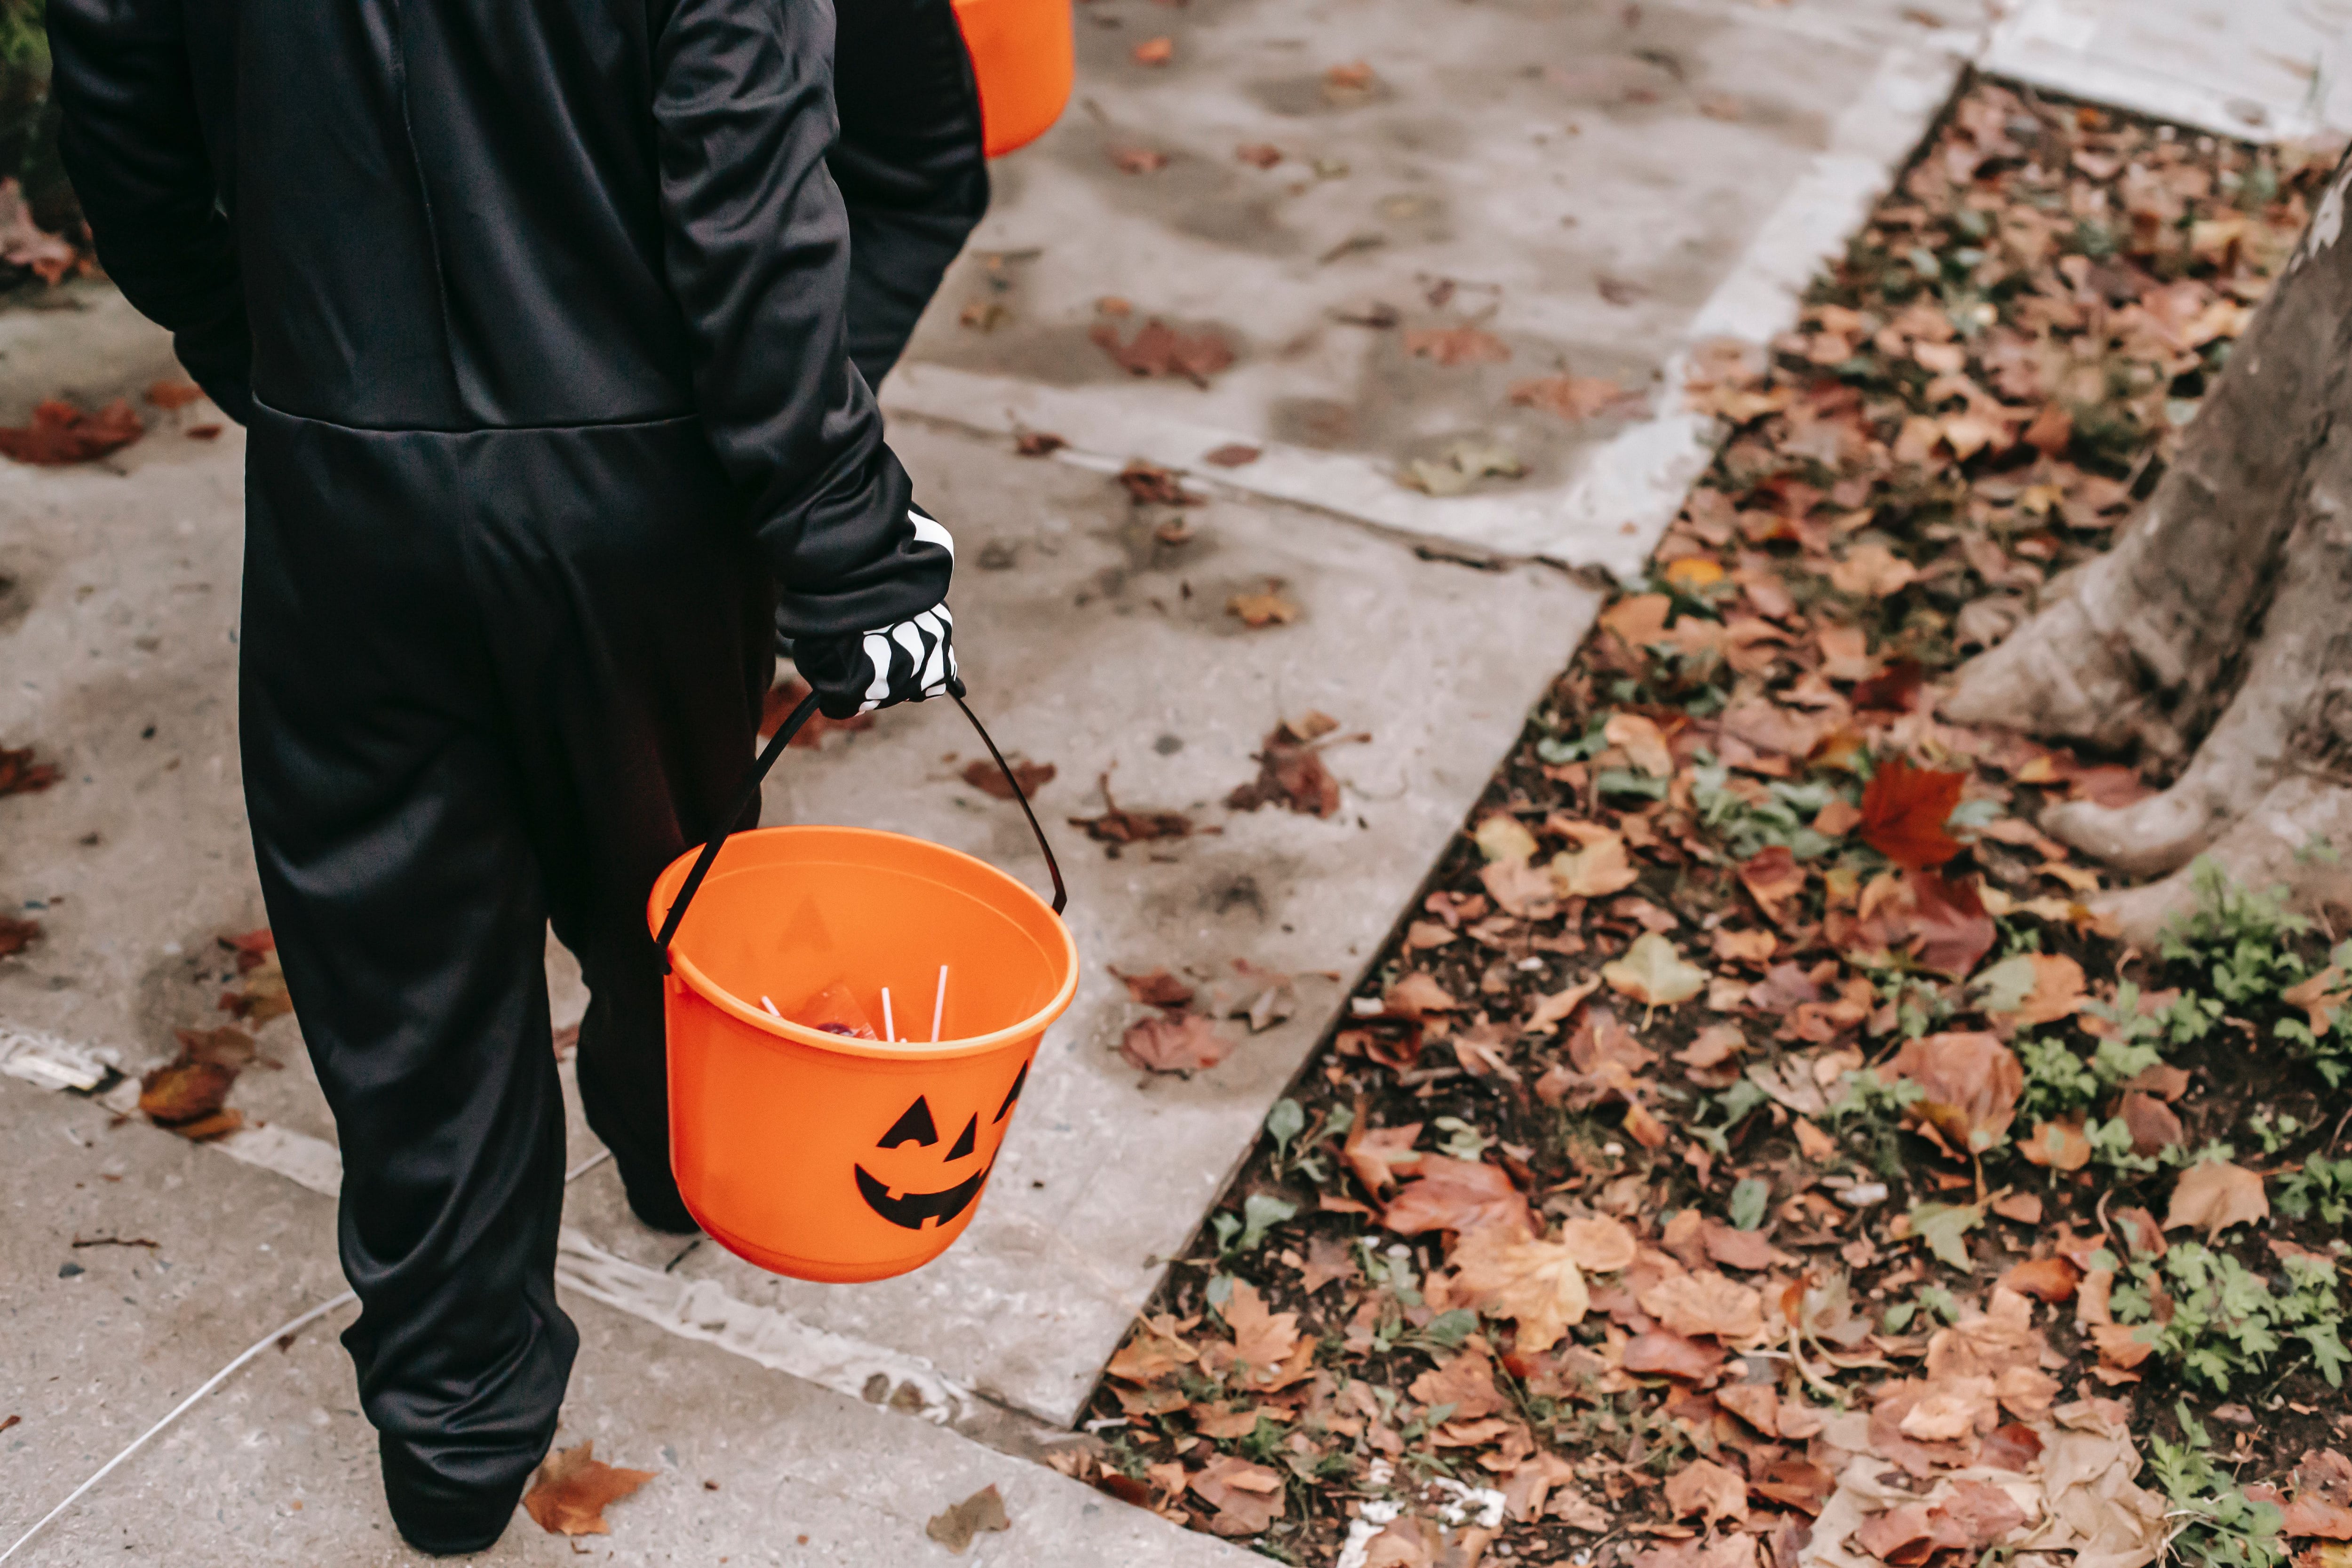 How to avoid sex offenders, predators on your Halloween trick-or-treating route